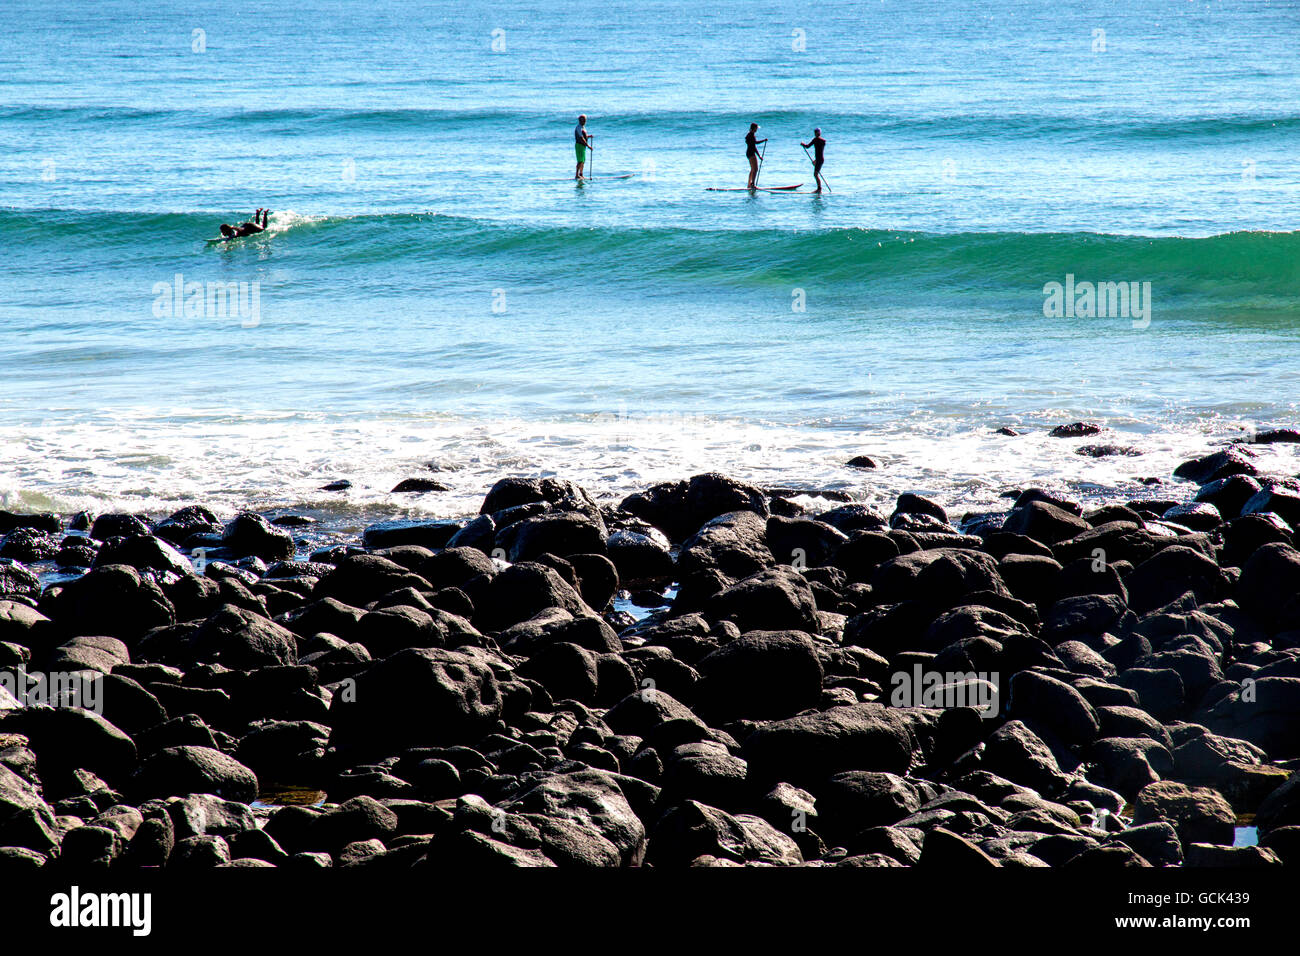 Board riders of various kinds off Burleigh Heads in Australia Stock Photo